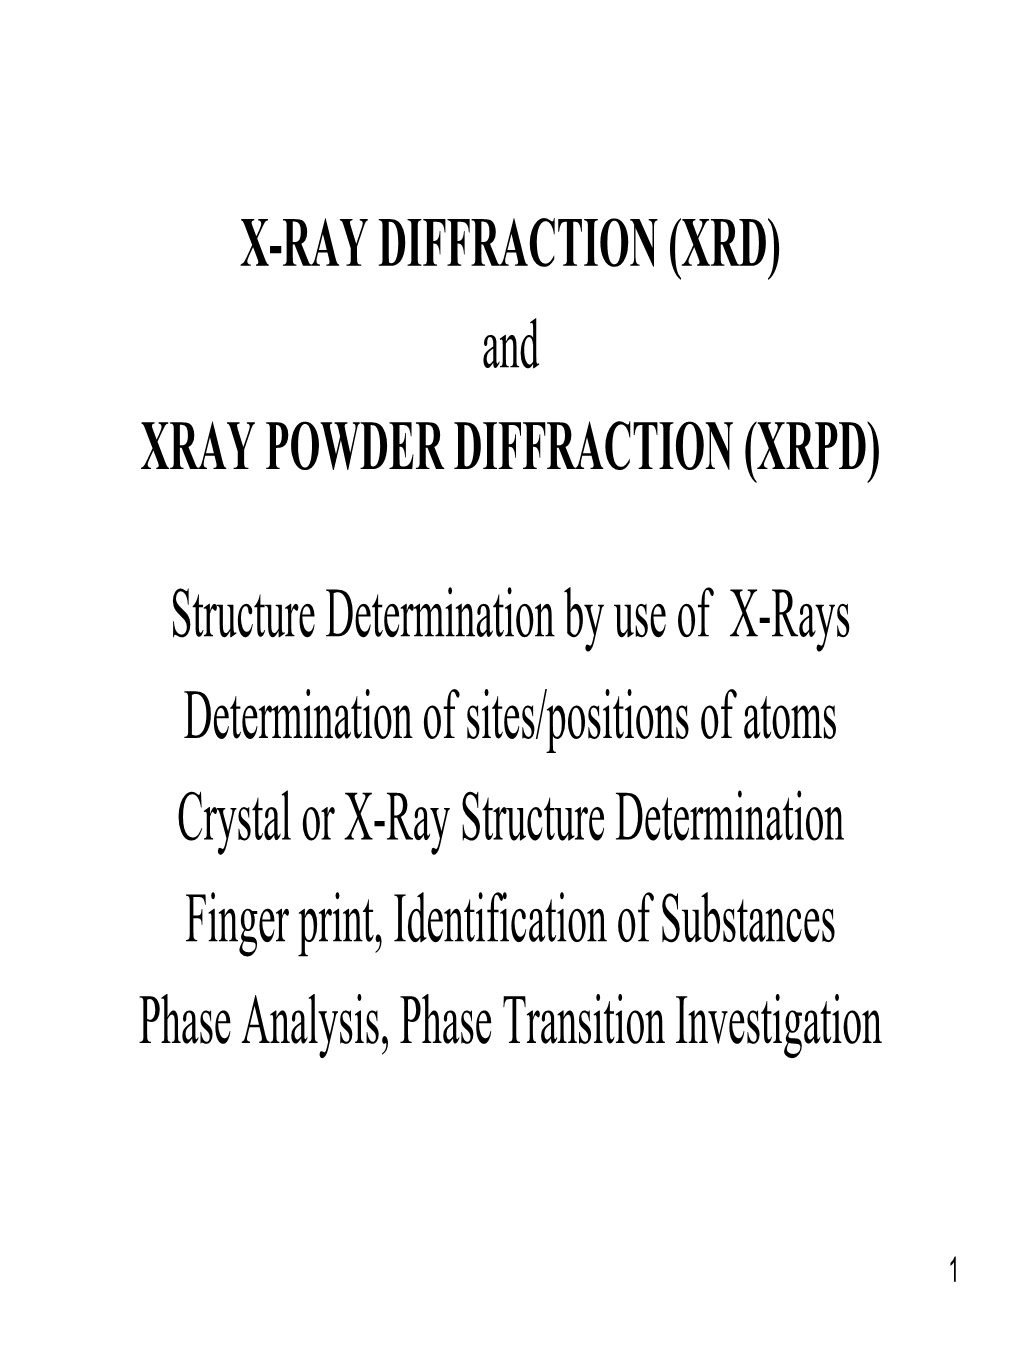 X-Ray Powder Diffraction (XRPD)